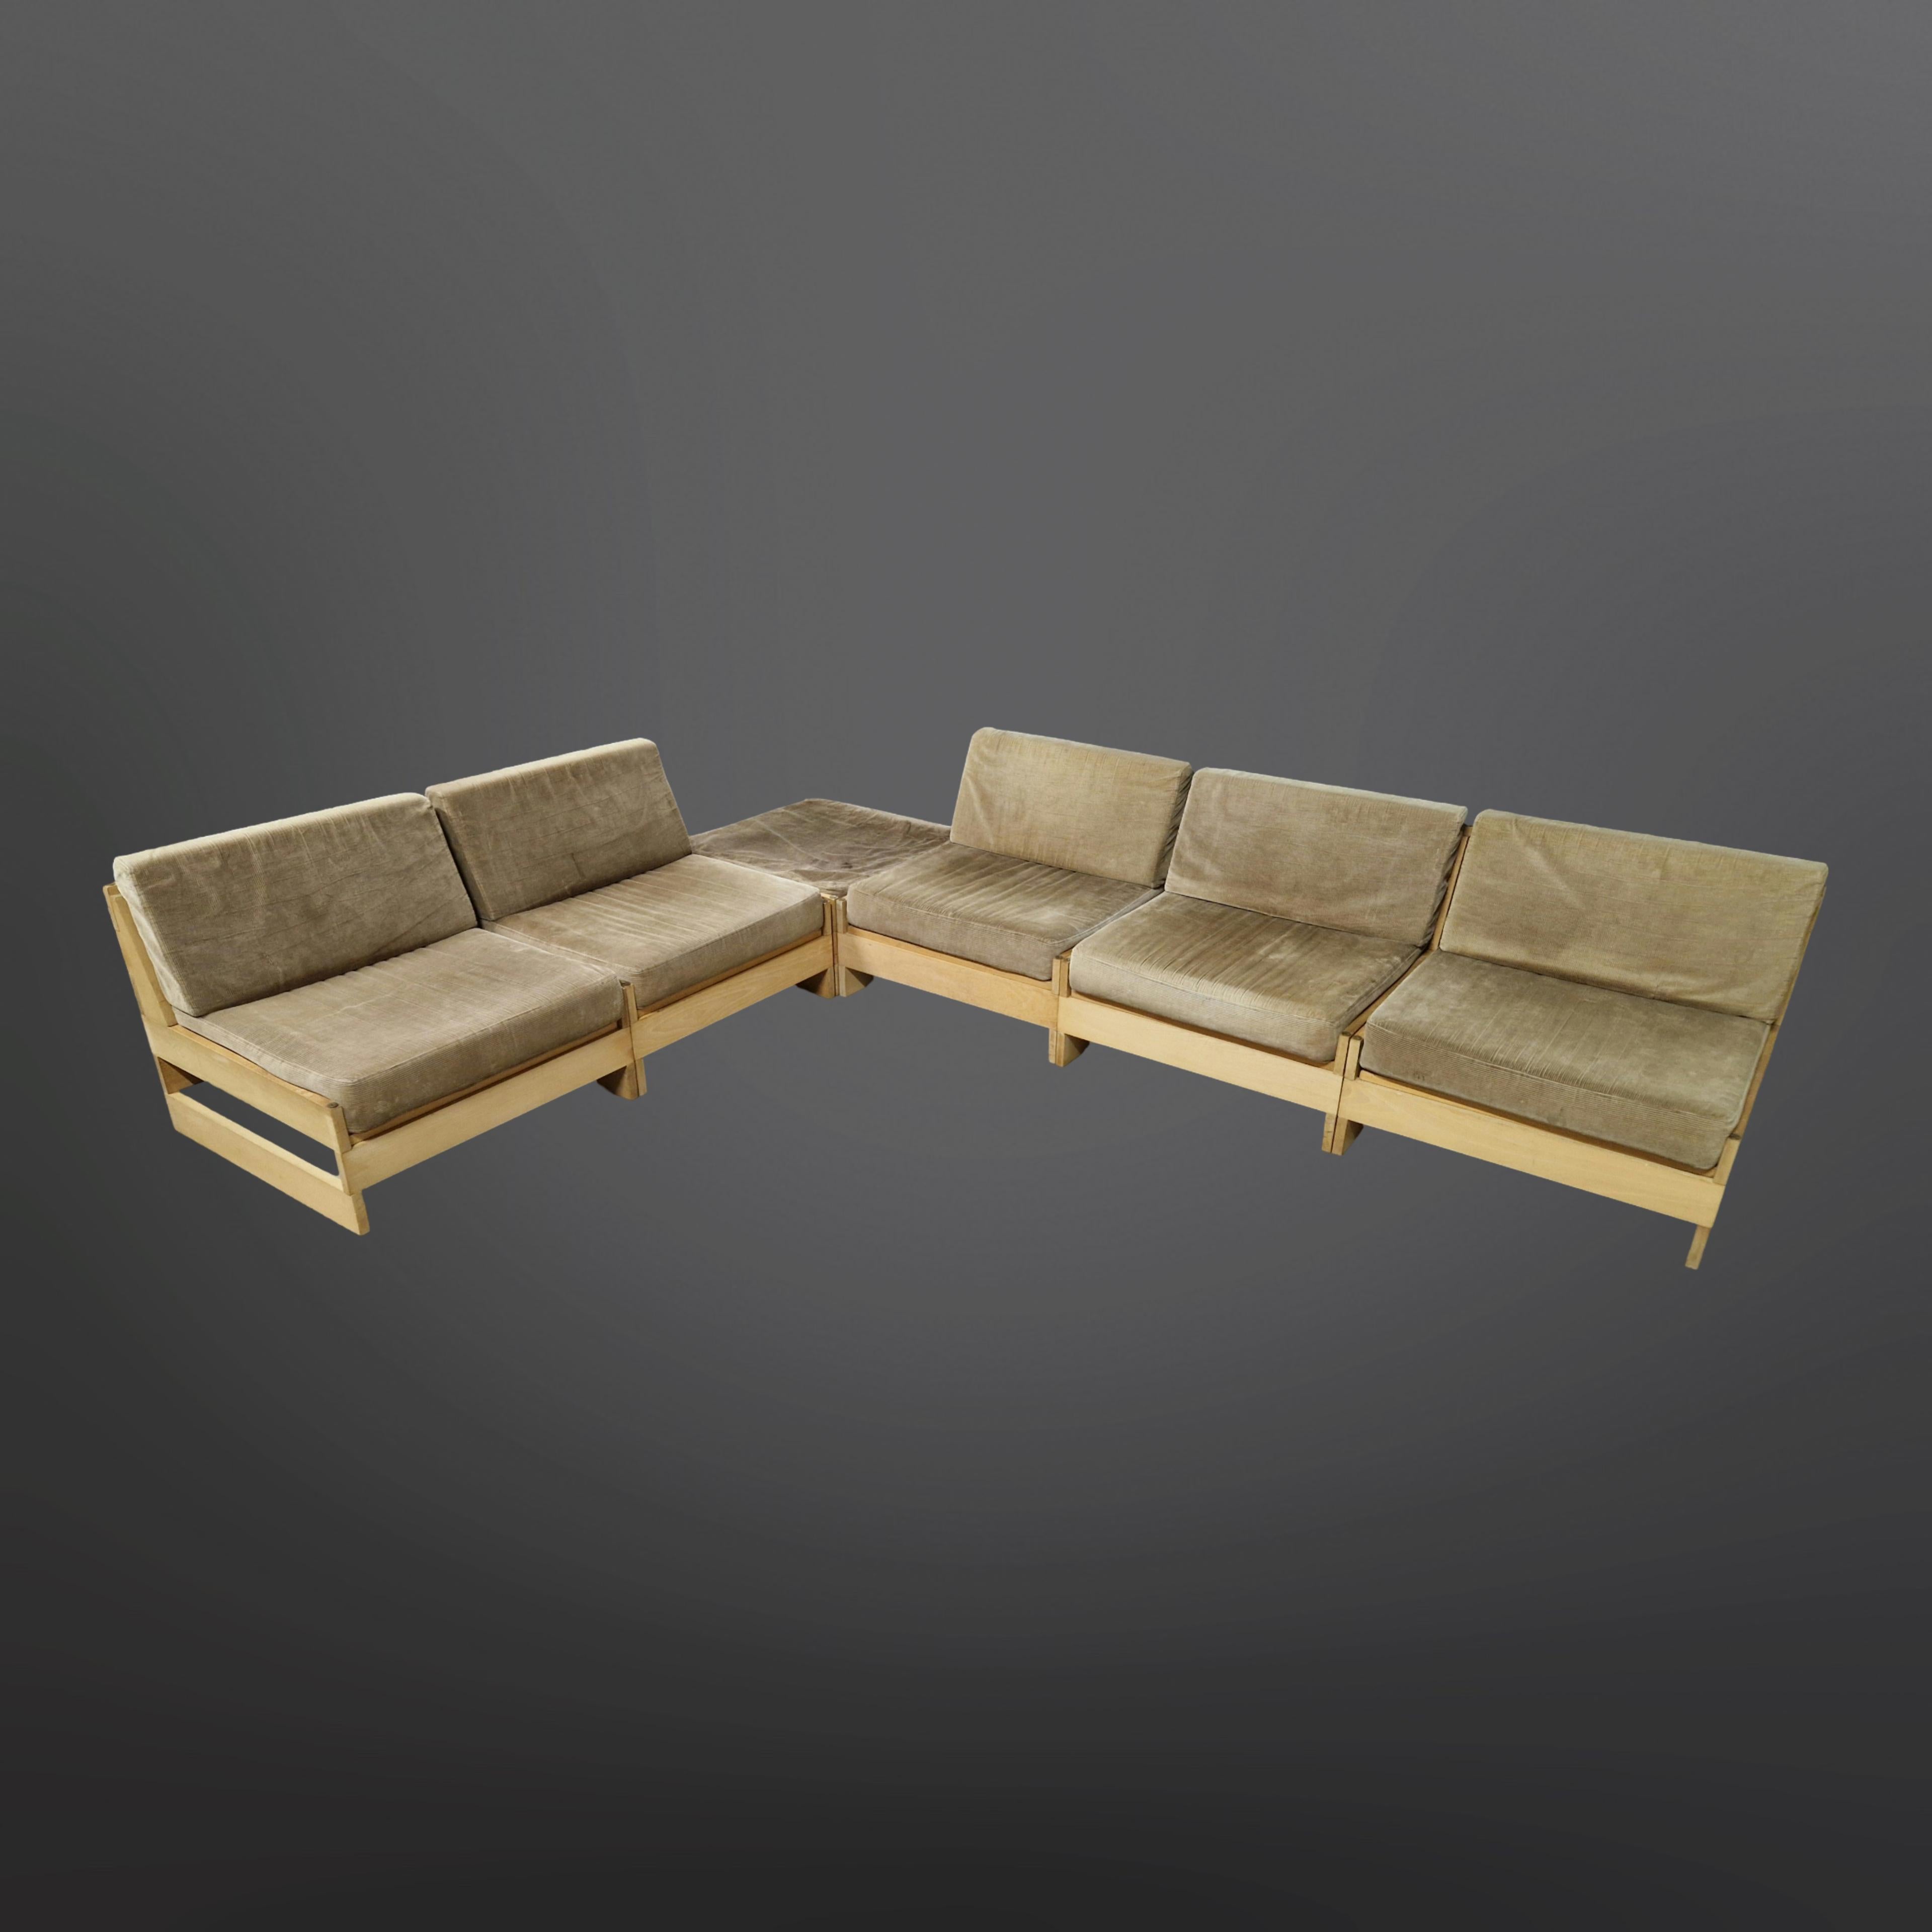 Mid century seating group. Made from solid beech with ribcord upholstery. The frames are made from slats of wood connected by a threaded rods that go through the wood and are fixed with brass hex nuts. It can be placed in different configurations